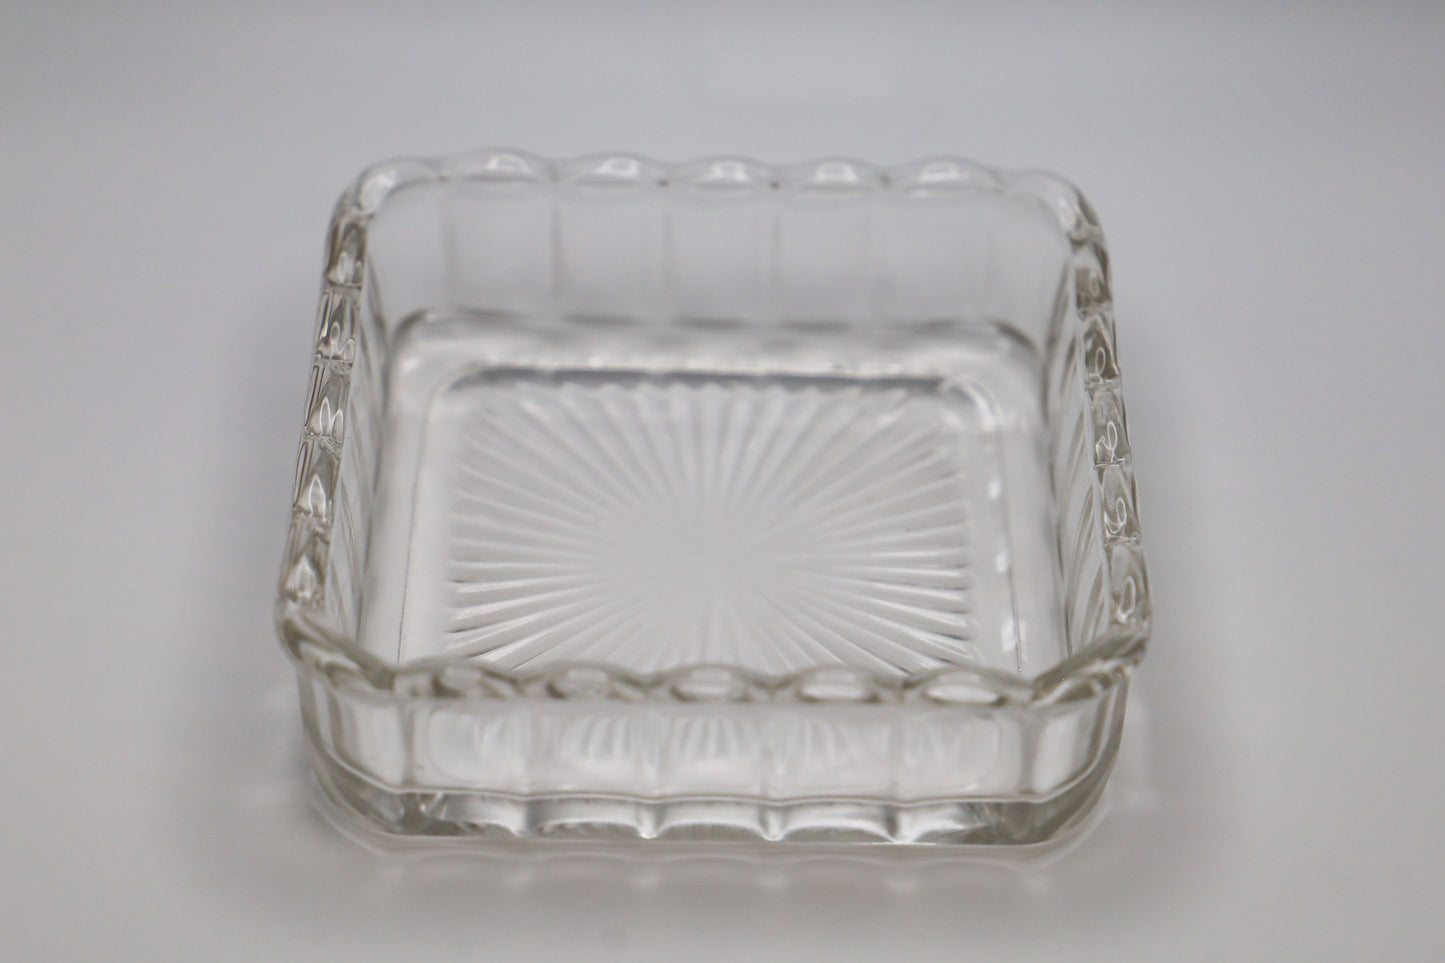 Clear glass bowl in unusual square shape, with scalloped top, ribbed sides, and starburst pattern on the bottom.